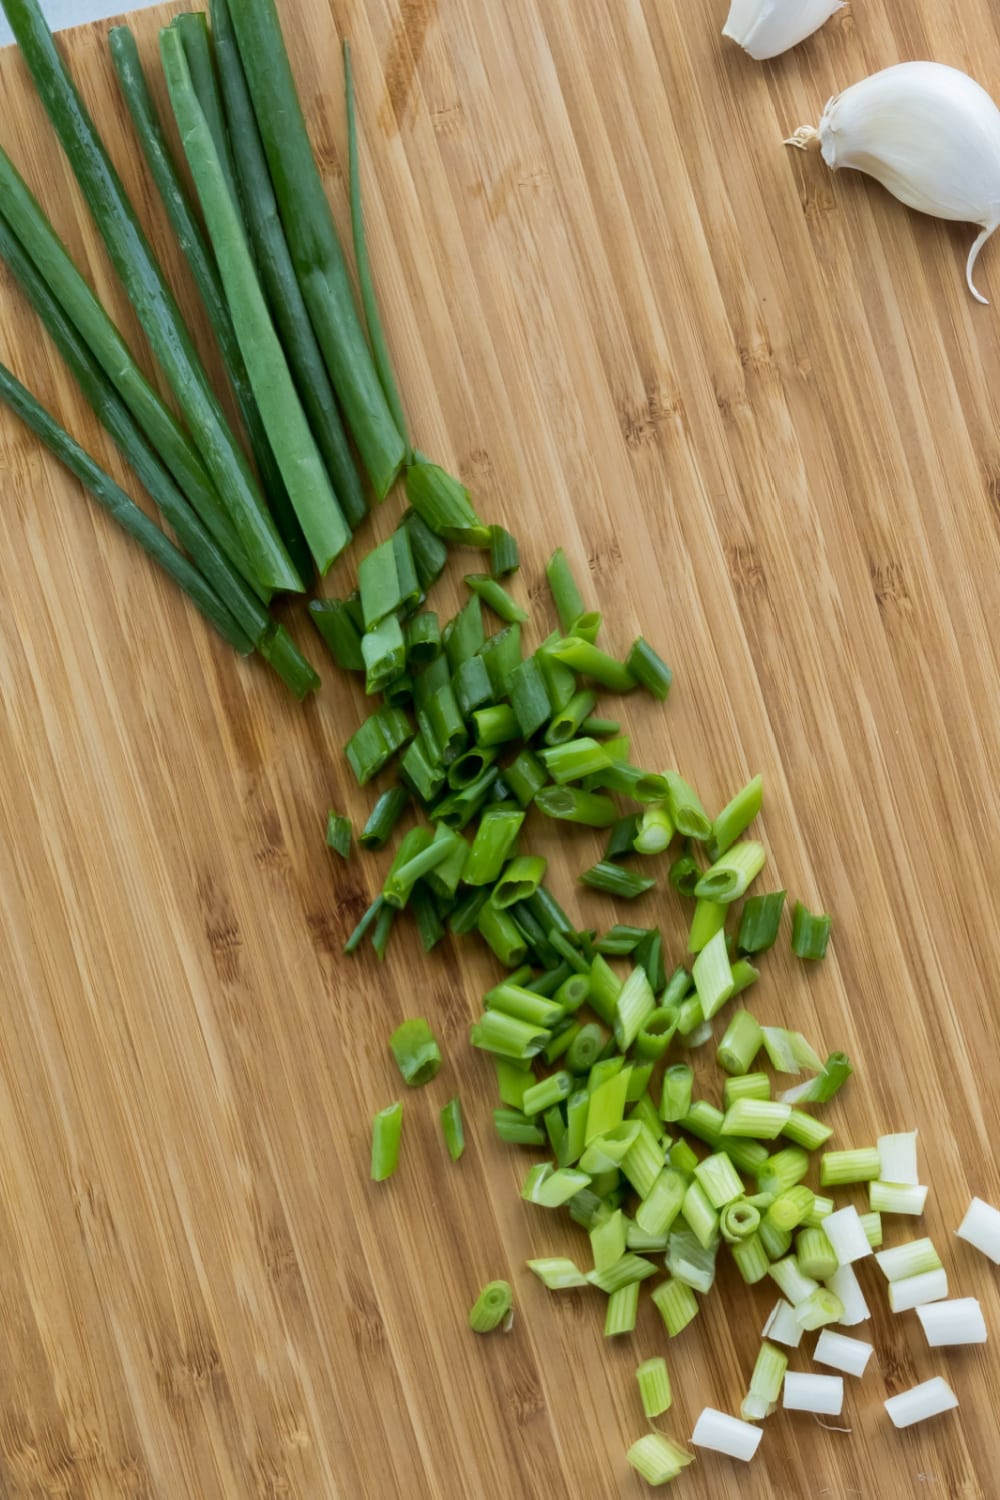 Chopped Green Onions and Cloves of Garlic on a Wooden Cutting Board